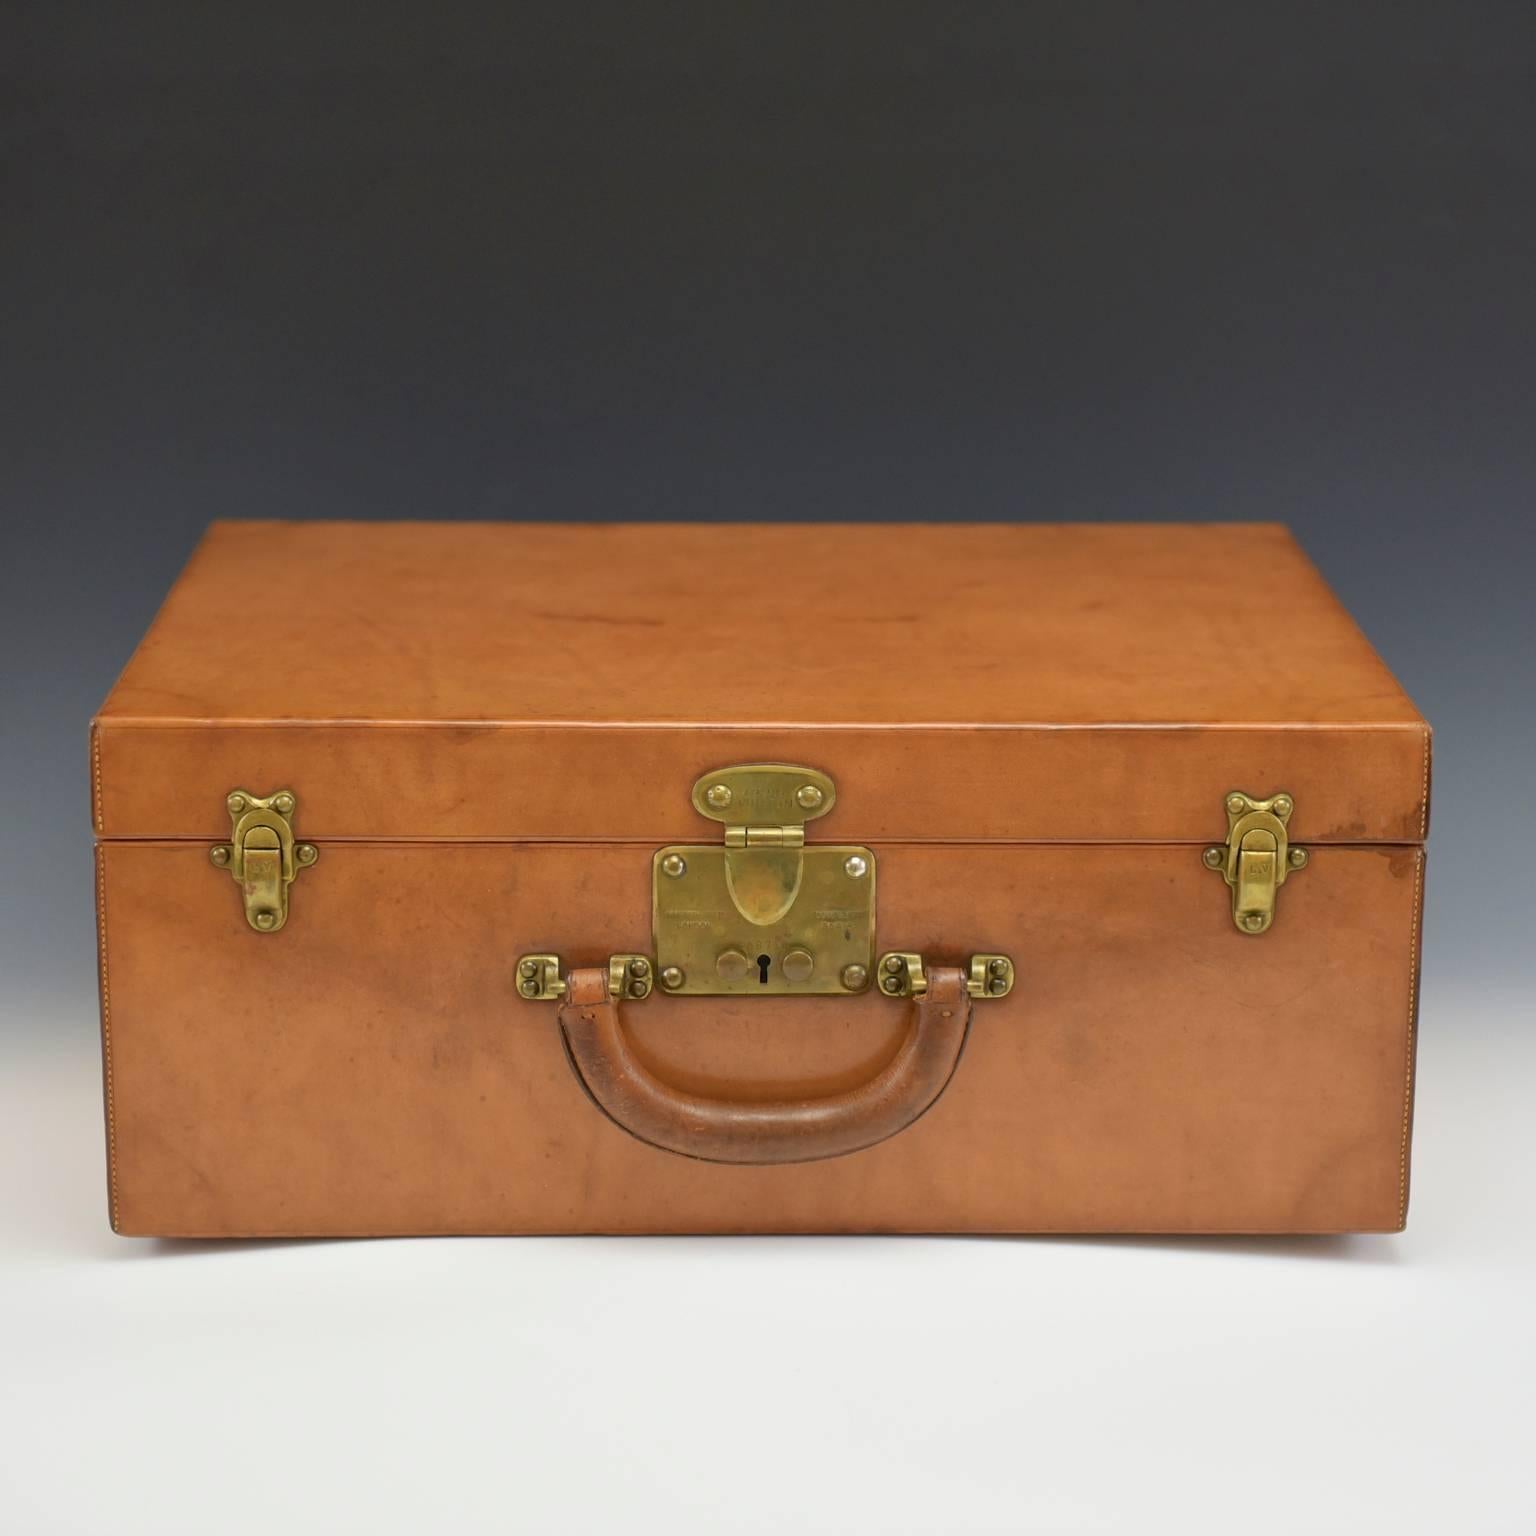 A beautiful Louis Vuitton Leather Case, circa 1935 in exceptional original condition, ideal for an overnight or weekend away. With original leather interior, circa 1935.

Louis Vuitton opened his first shop on Rue Neuve des Capucines, Paris in 1854